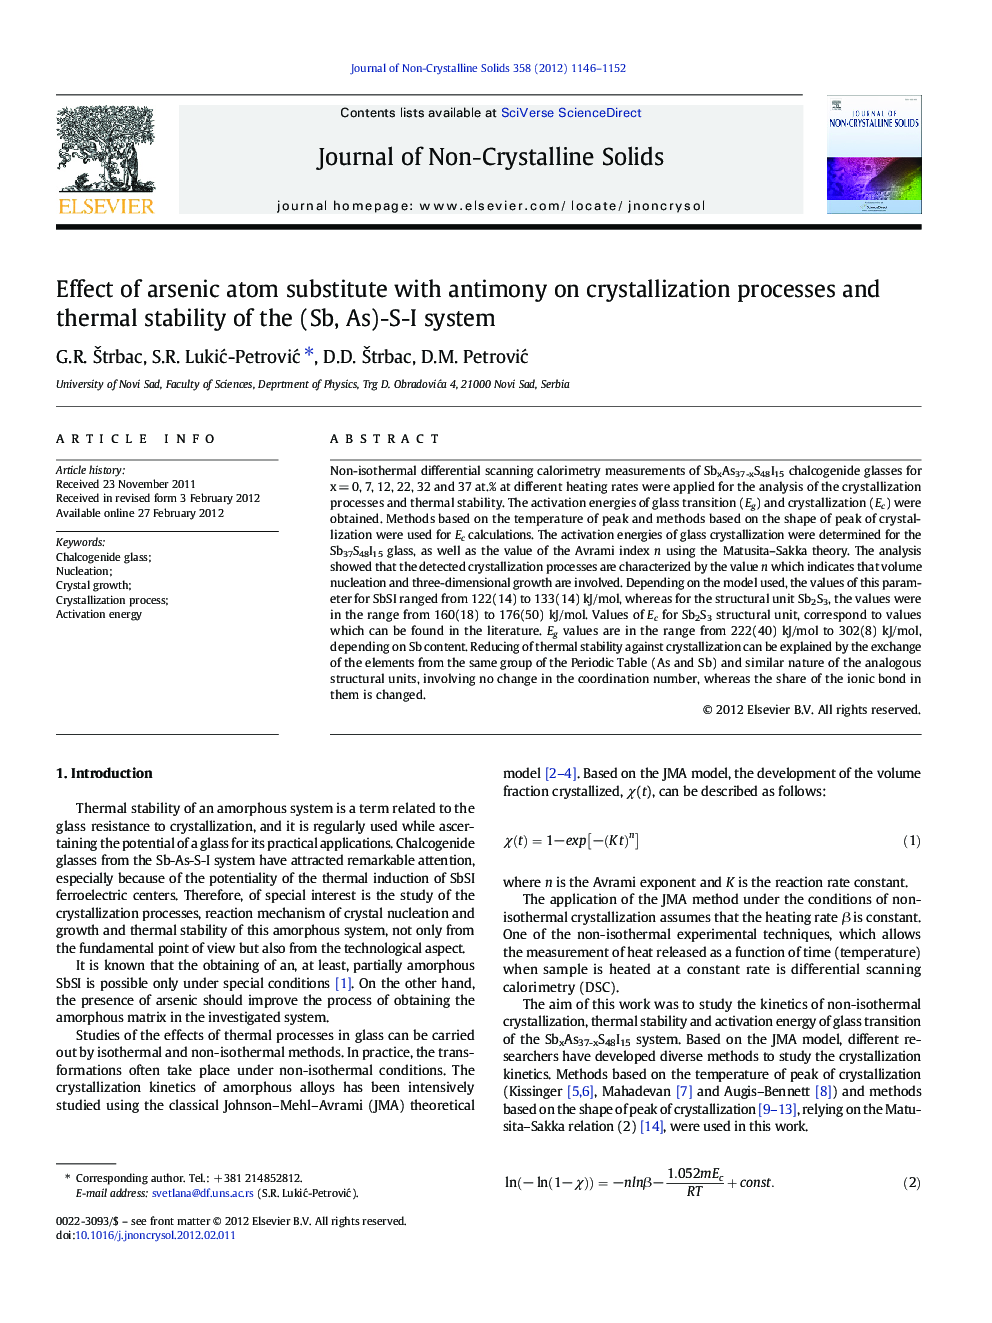 Effect of arsenic atom substitute with antimony on crystallization processes and thermal stability of the (Sb, As)-S-I system